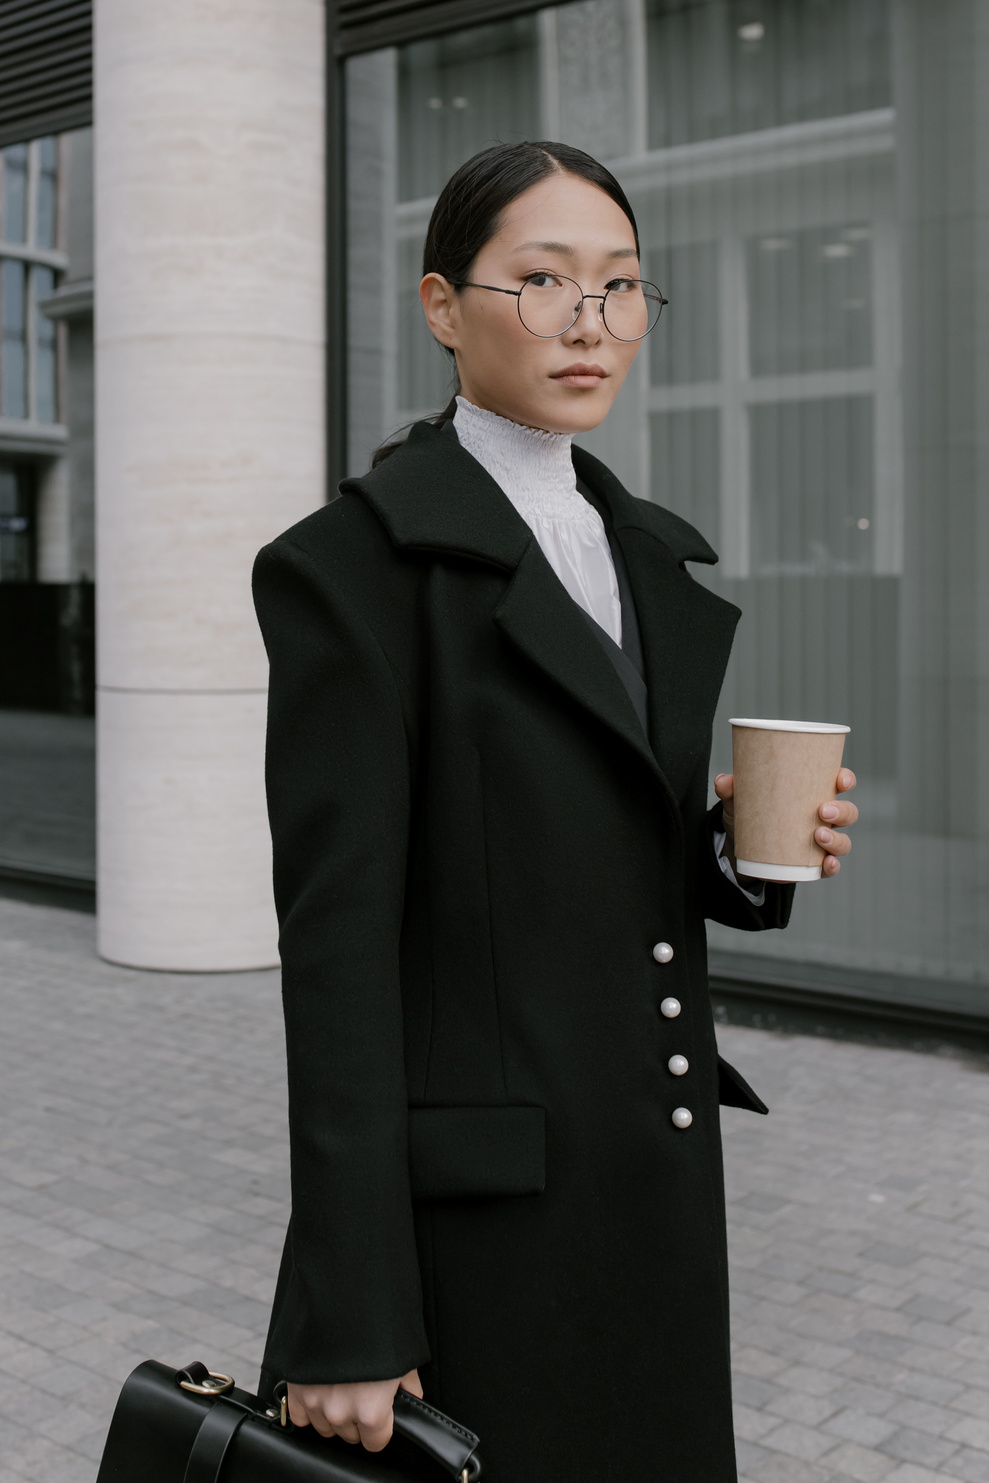 A Woman in Black Coat Wearing Eyeglasses while Holding a Cup of Coffee